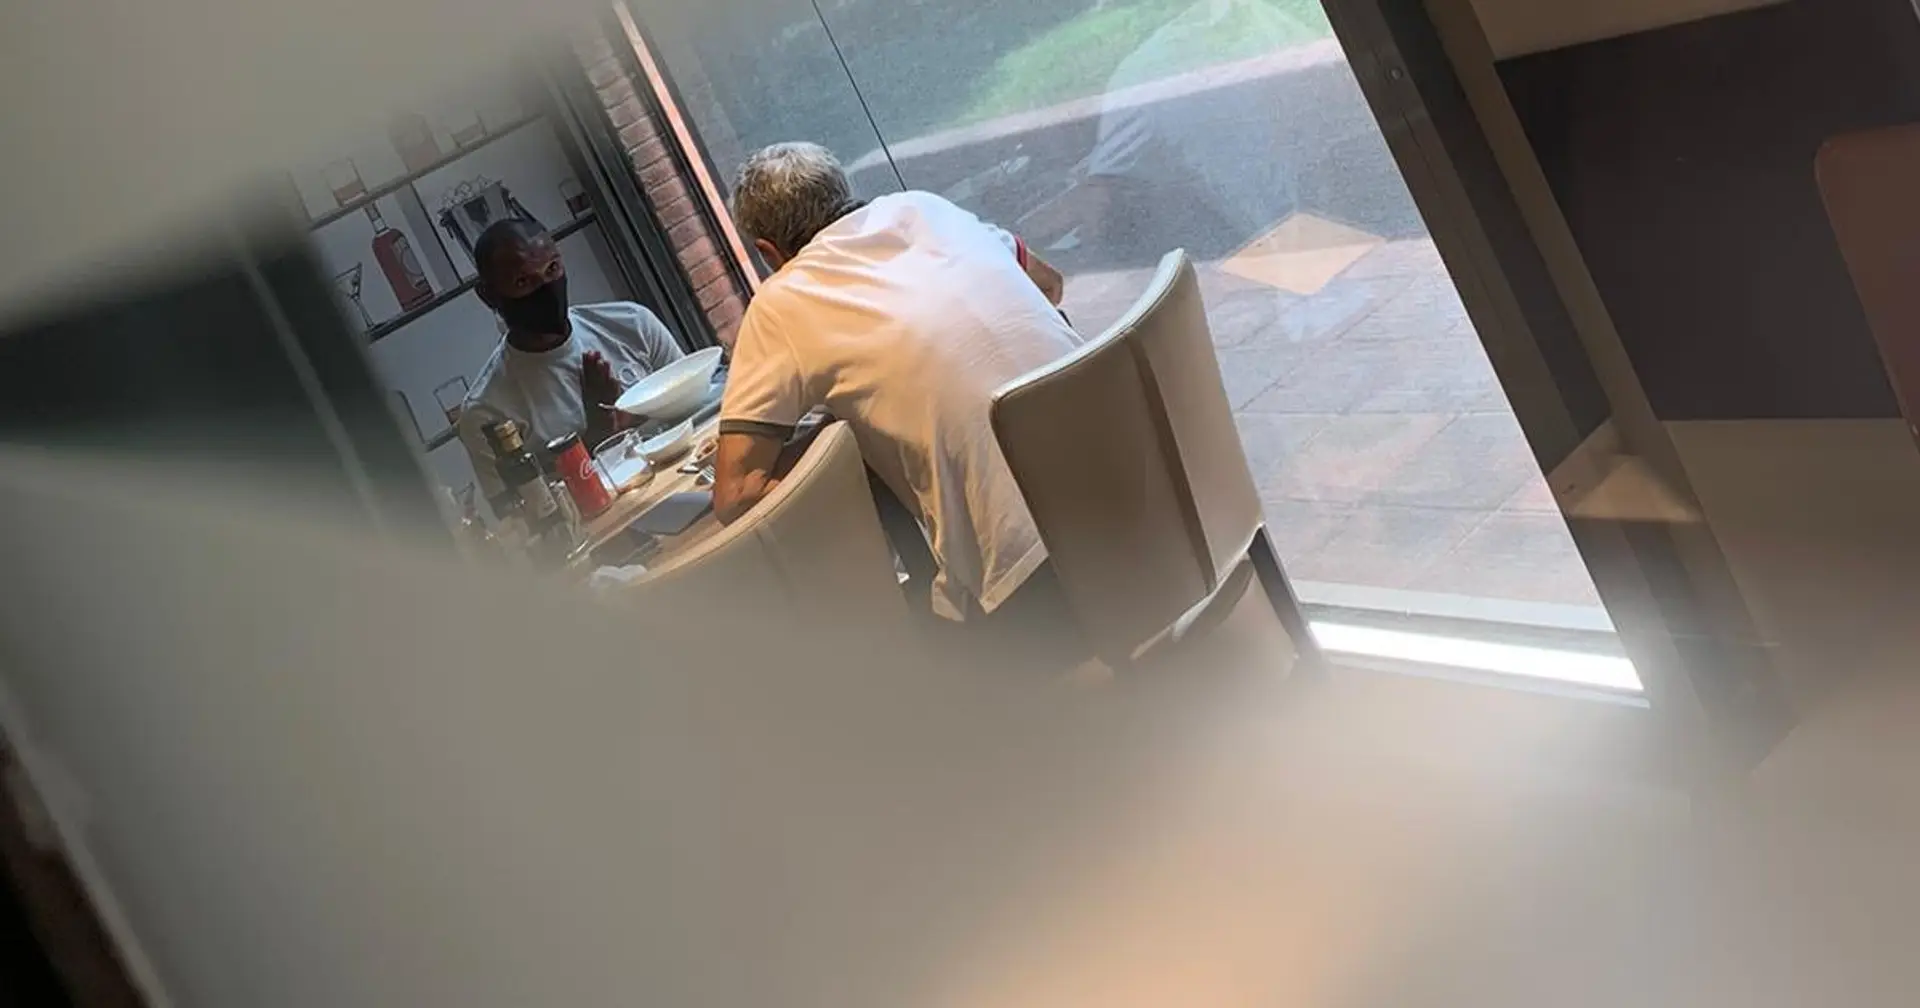 Underfire Setien and Abidal pictured at lunch during Barca's board meeting